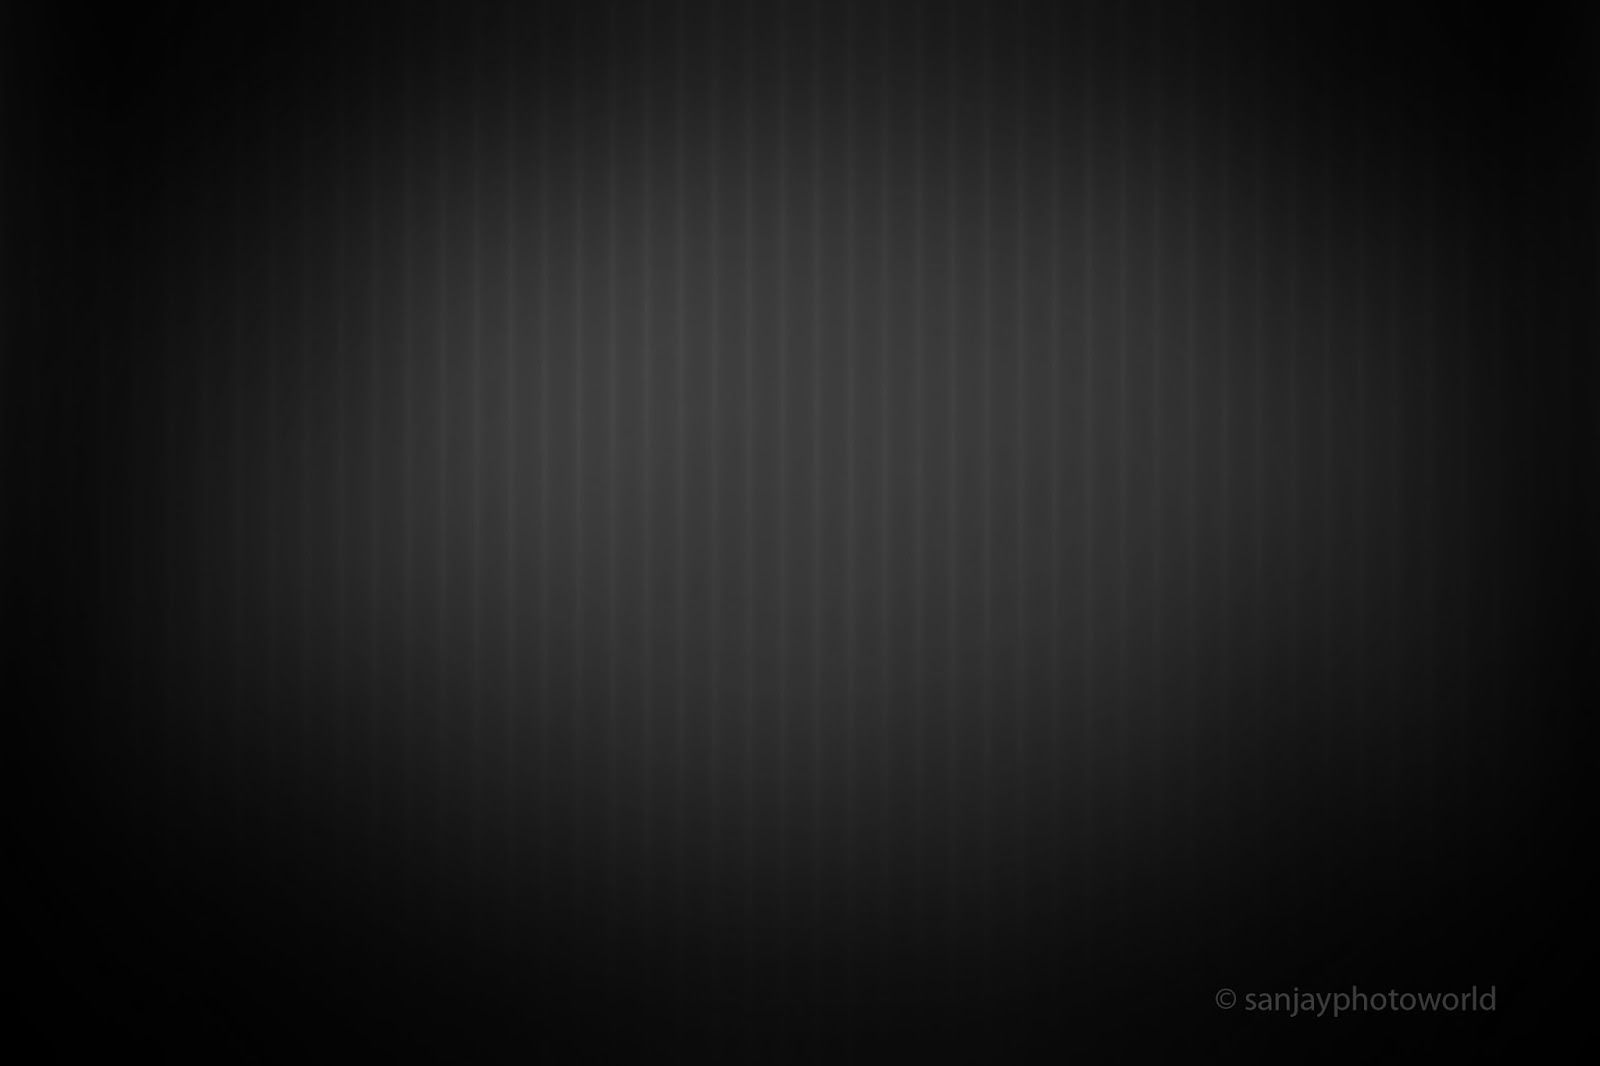 HD Backgrounds For Photoshop